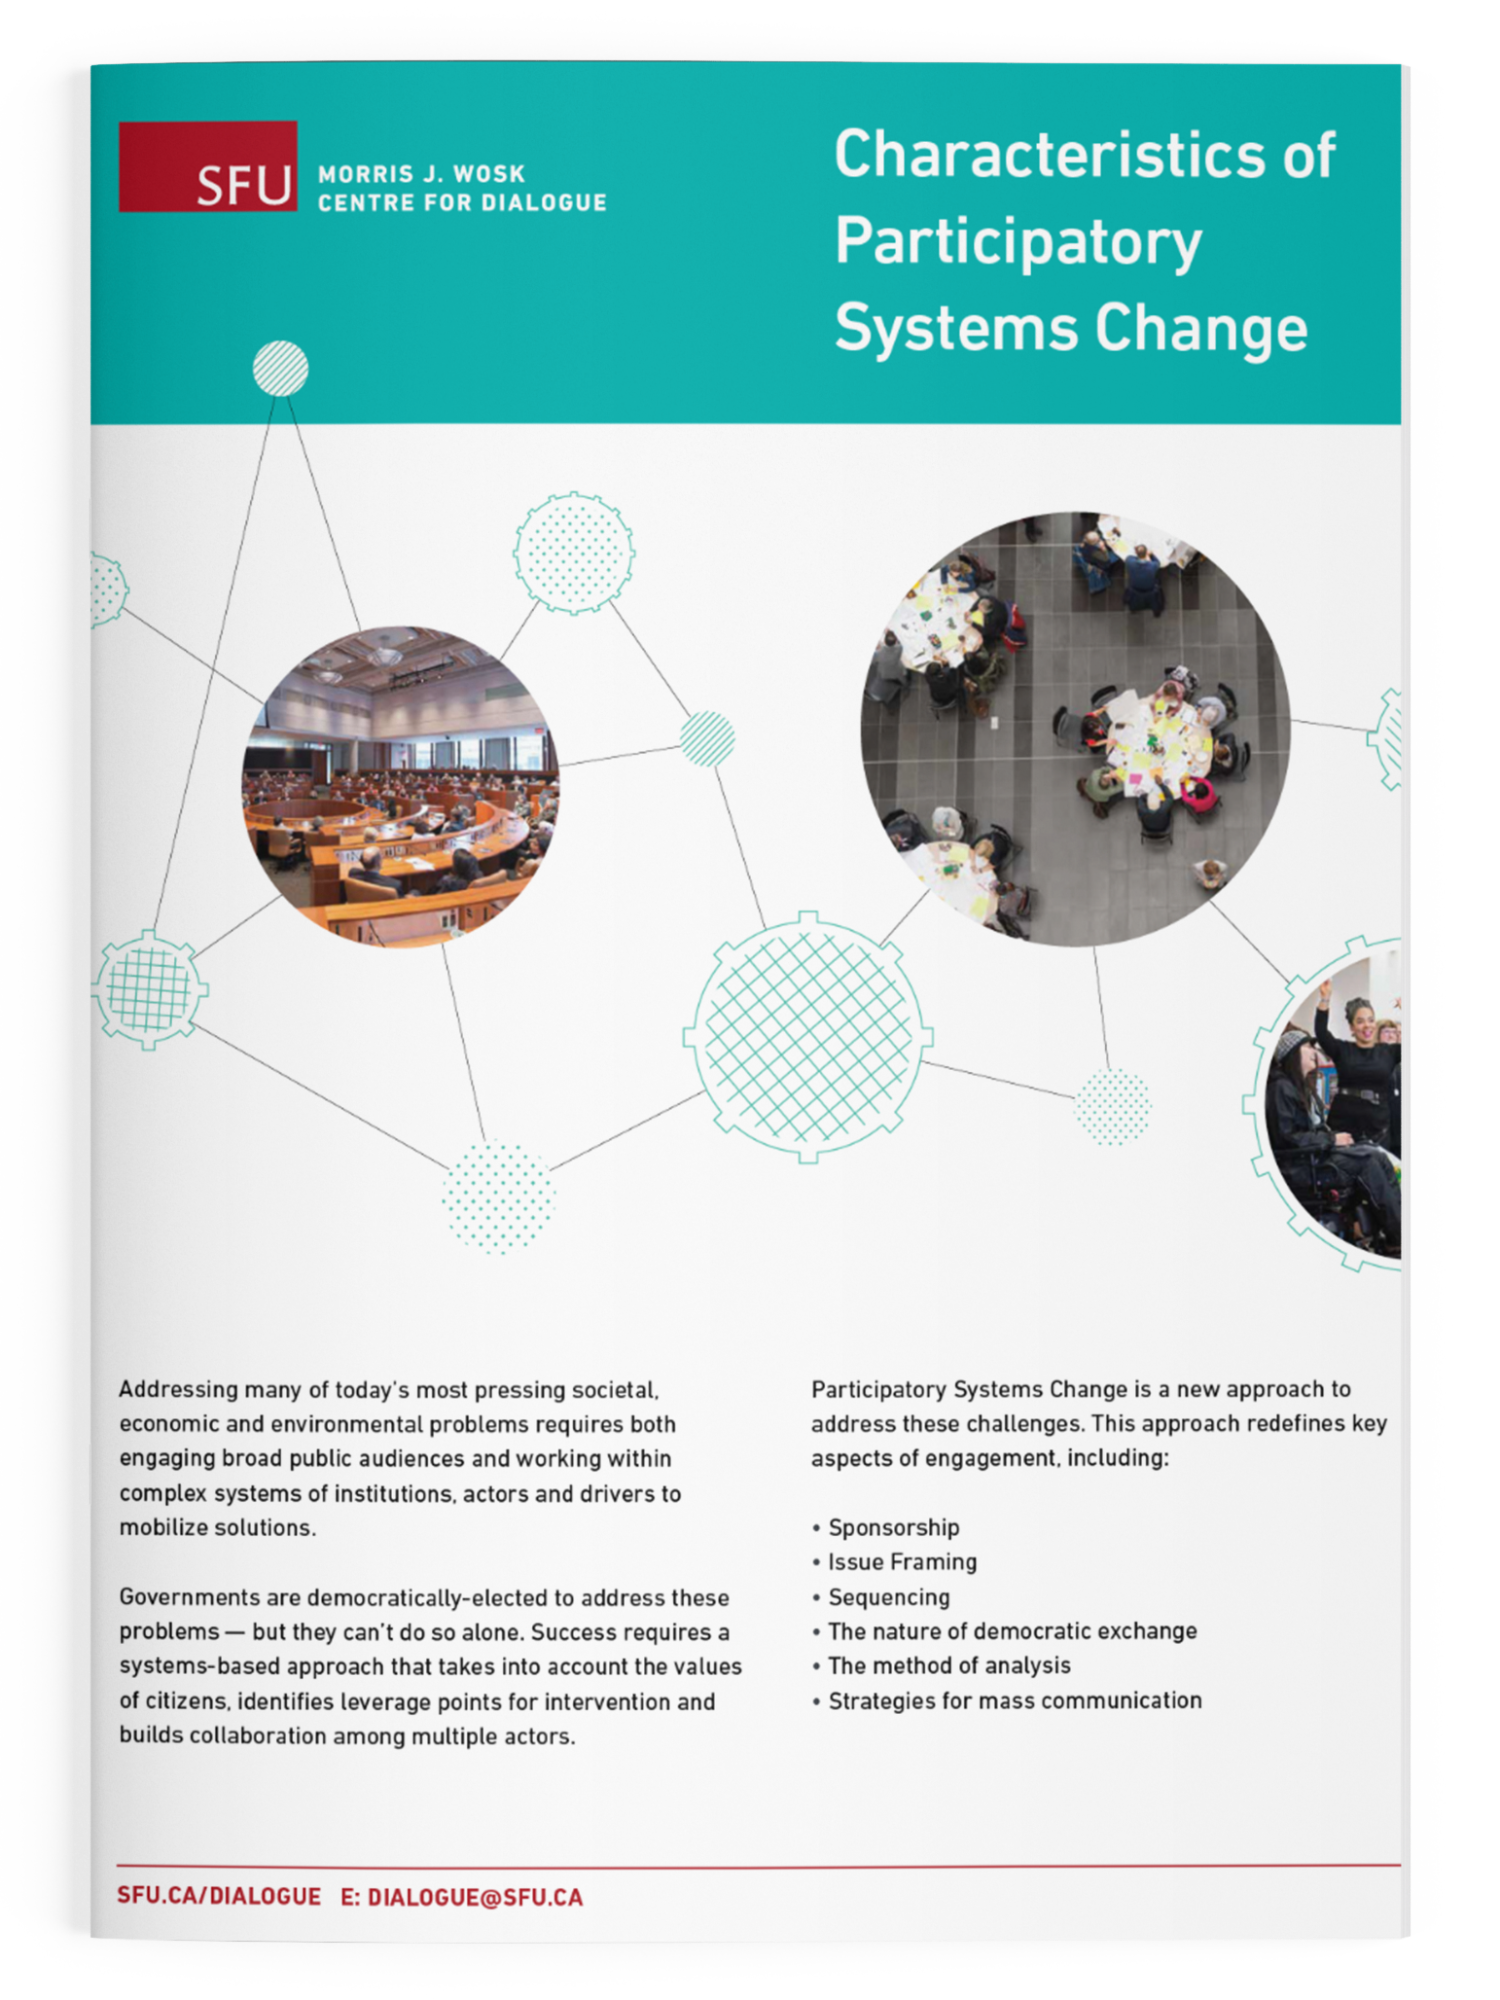 Cover of the characteristics of participatory systems change four-pager